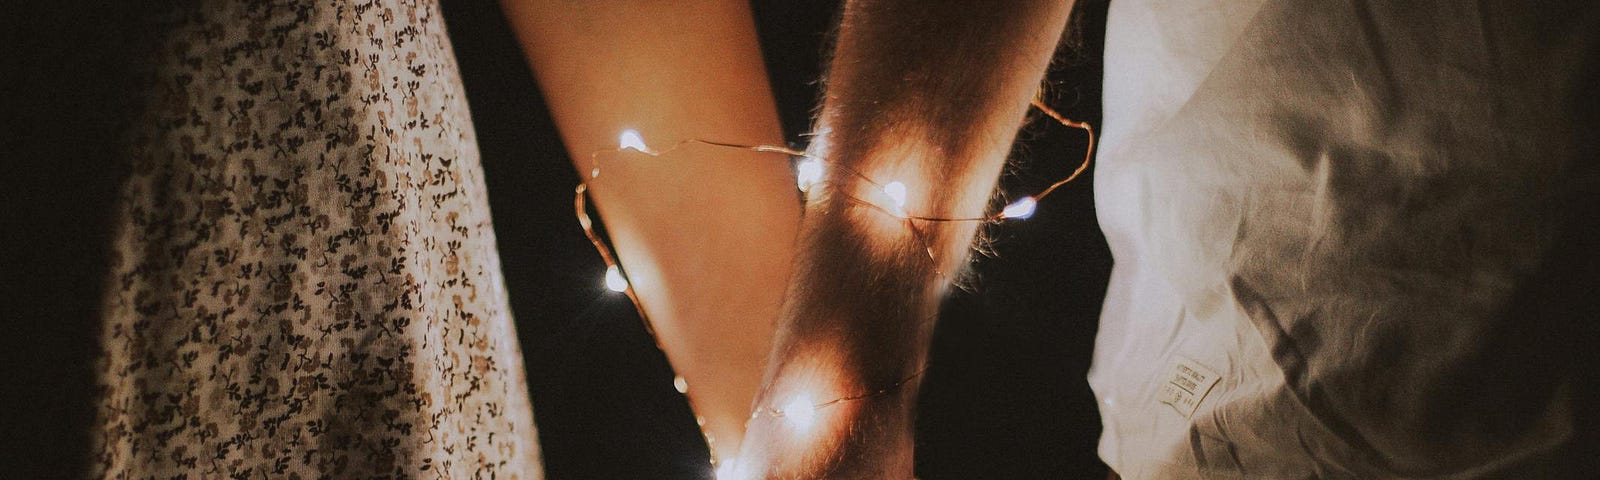 A couple hold hands as tiny lights highlight their emotional and physical connection and how altruism lights up our lives.